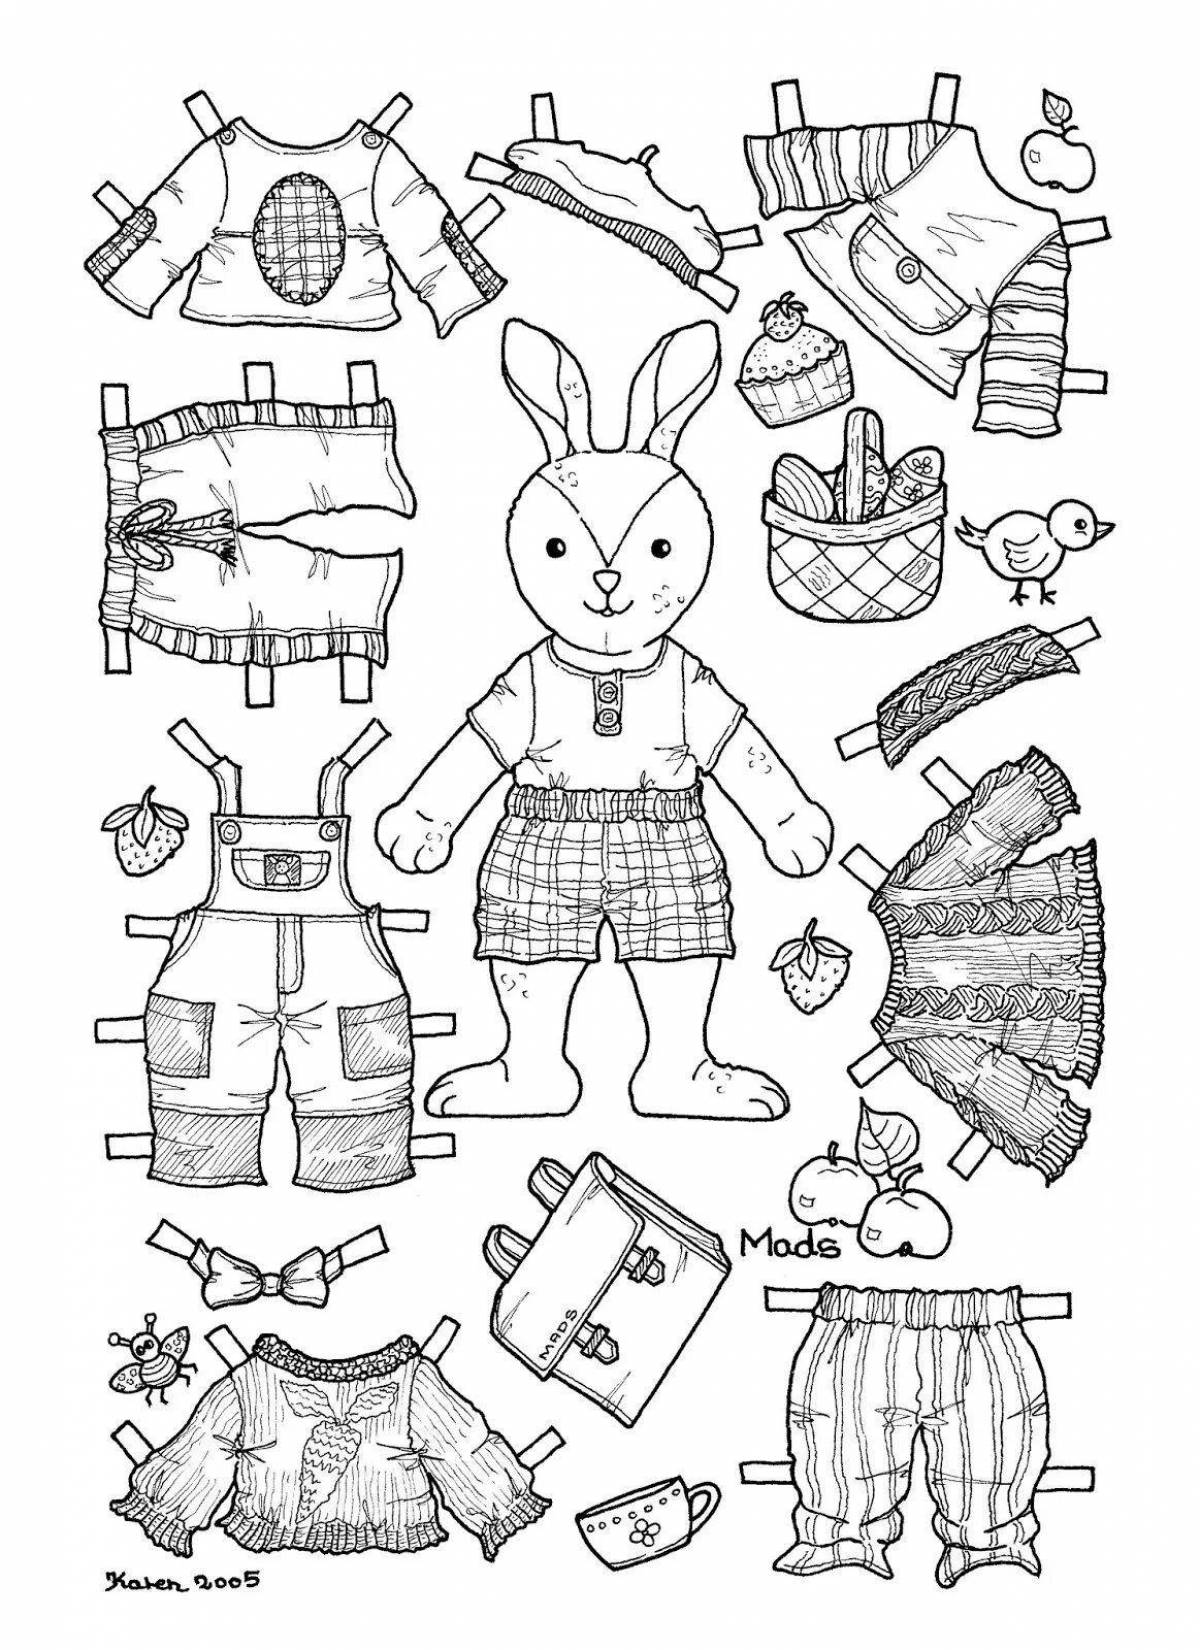 Smiling rabbit doll coloring book